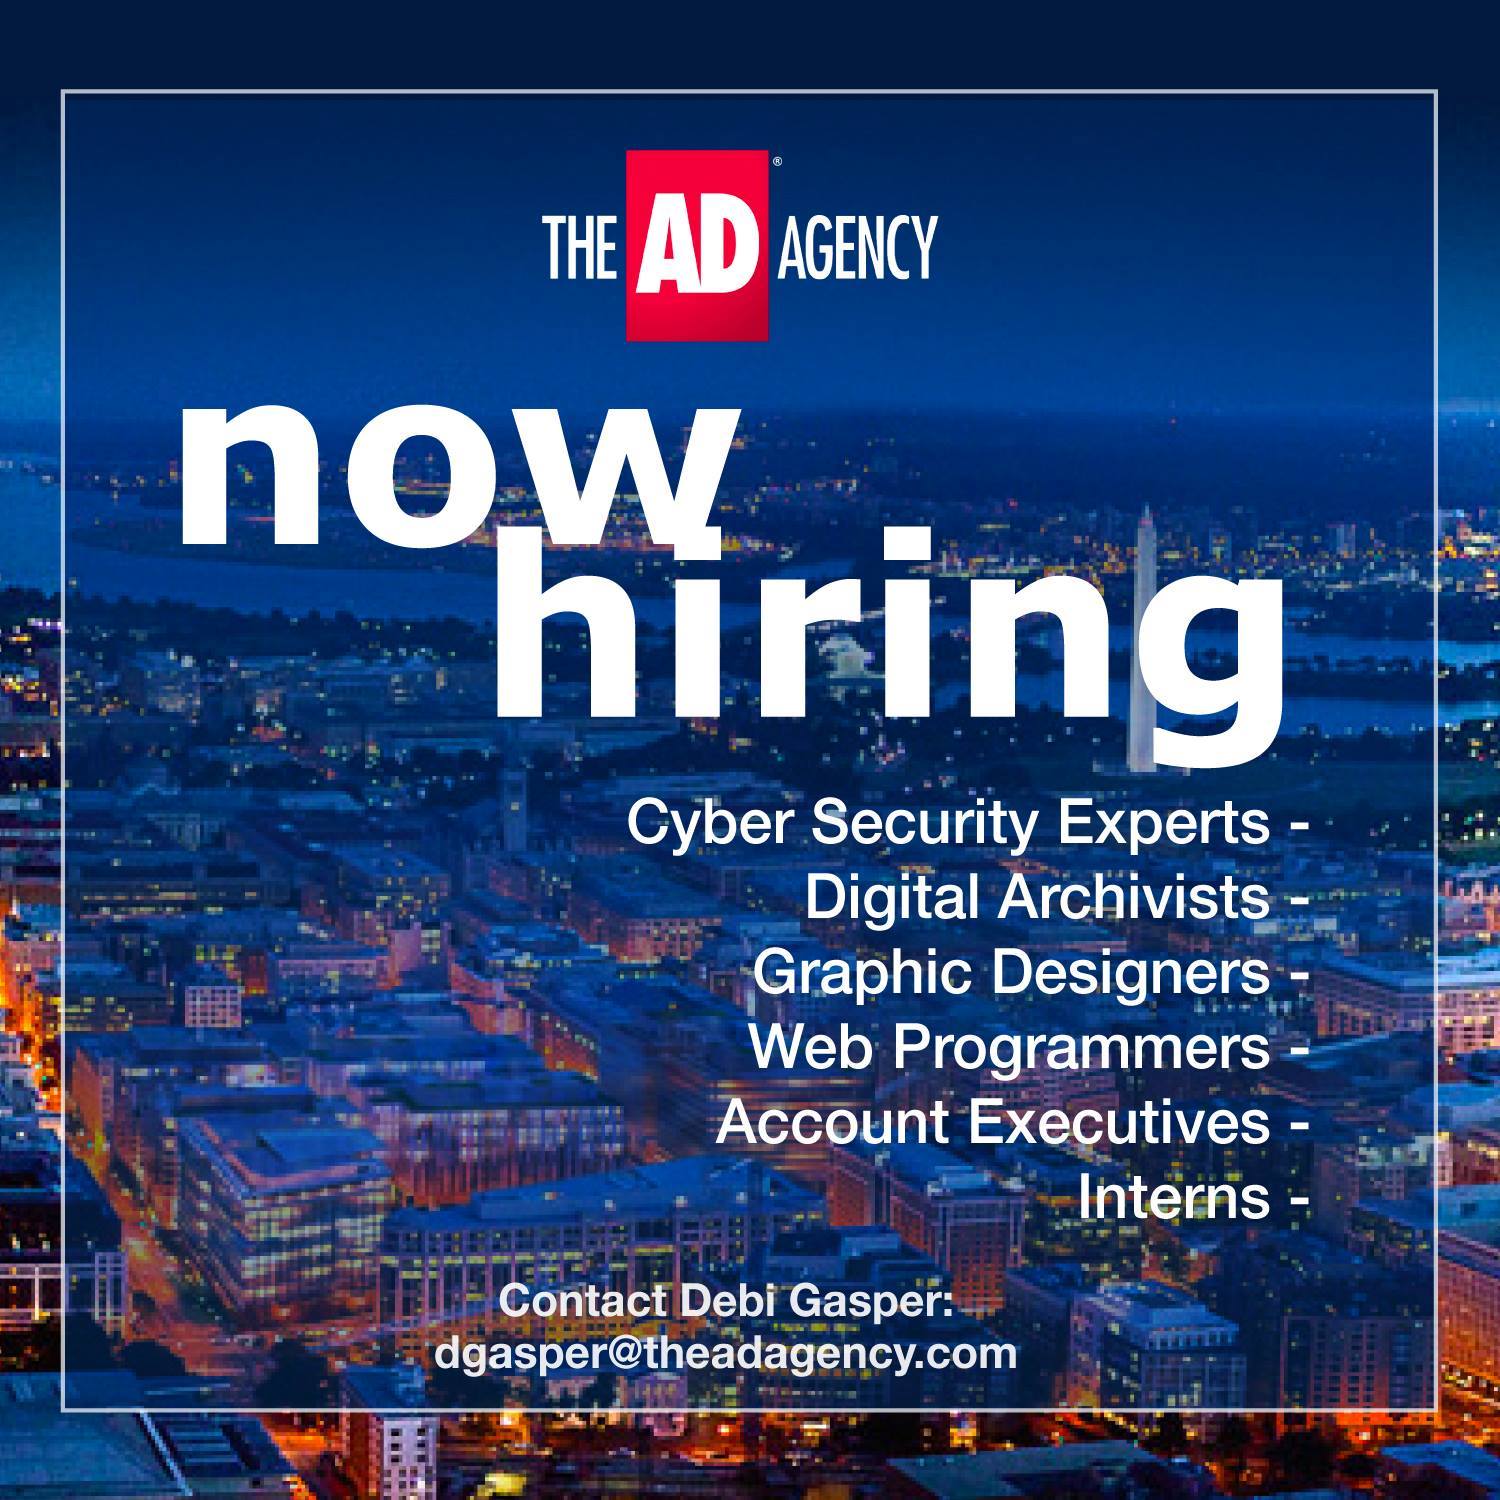 The AD Agency is now hiring